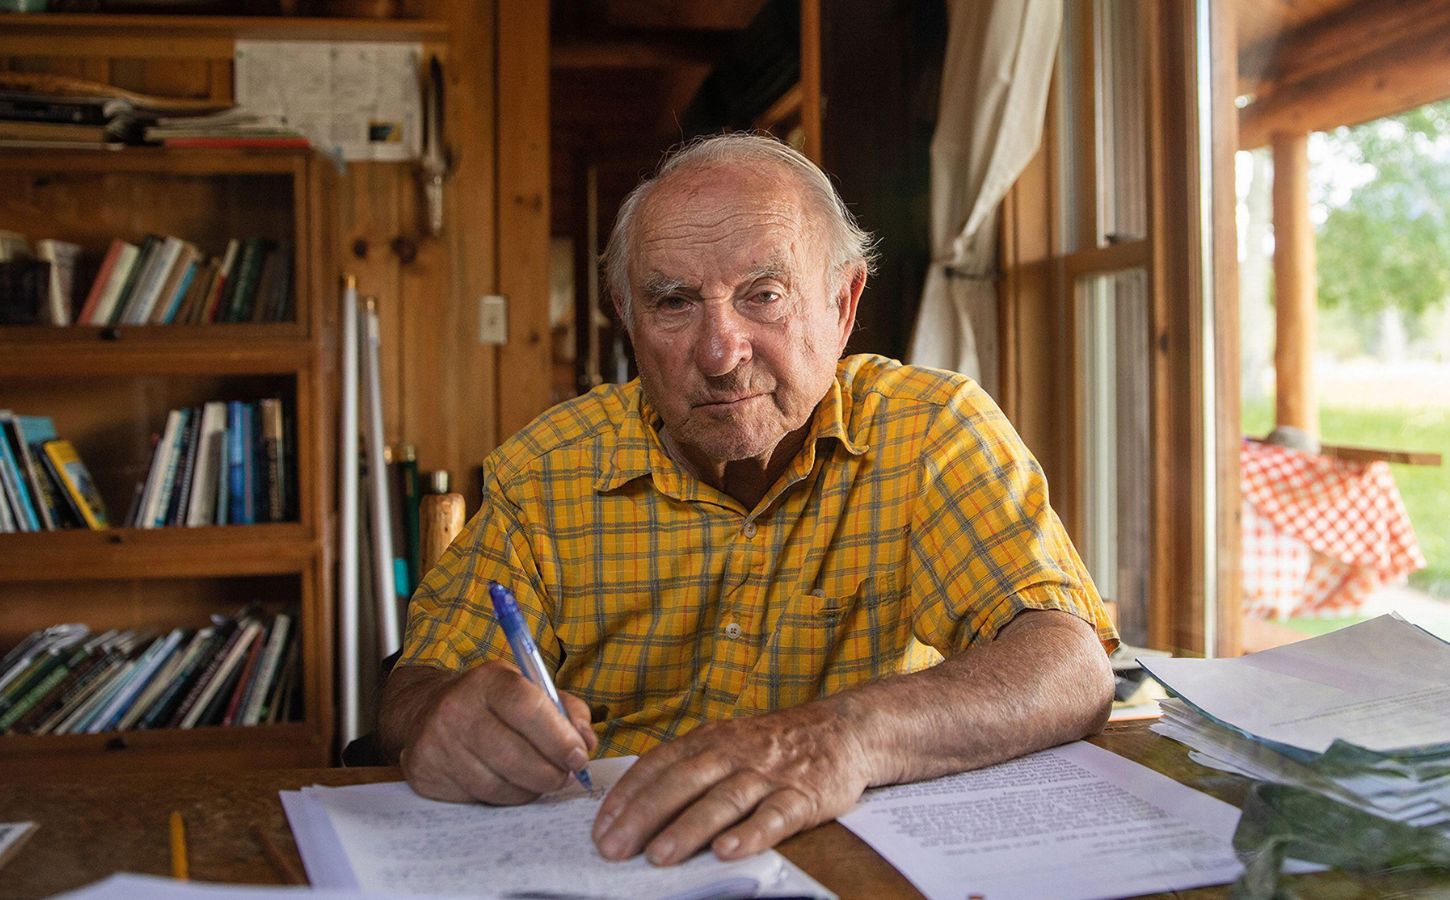 Yvon Chouinard has donated his company Patagonia to help fight the climate crisis